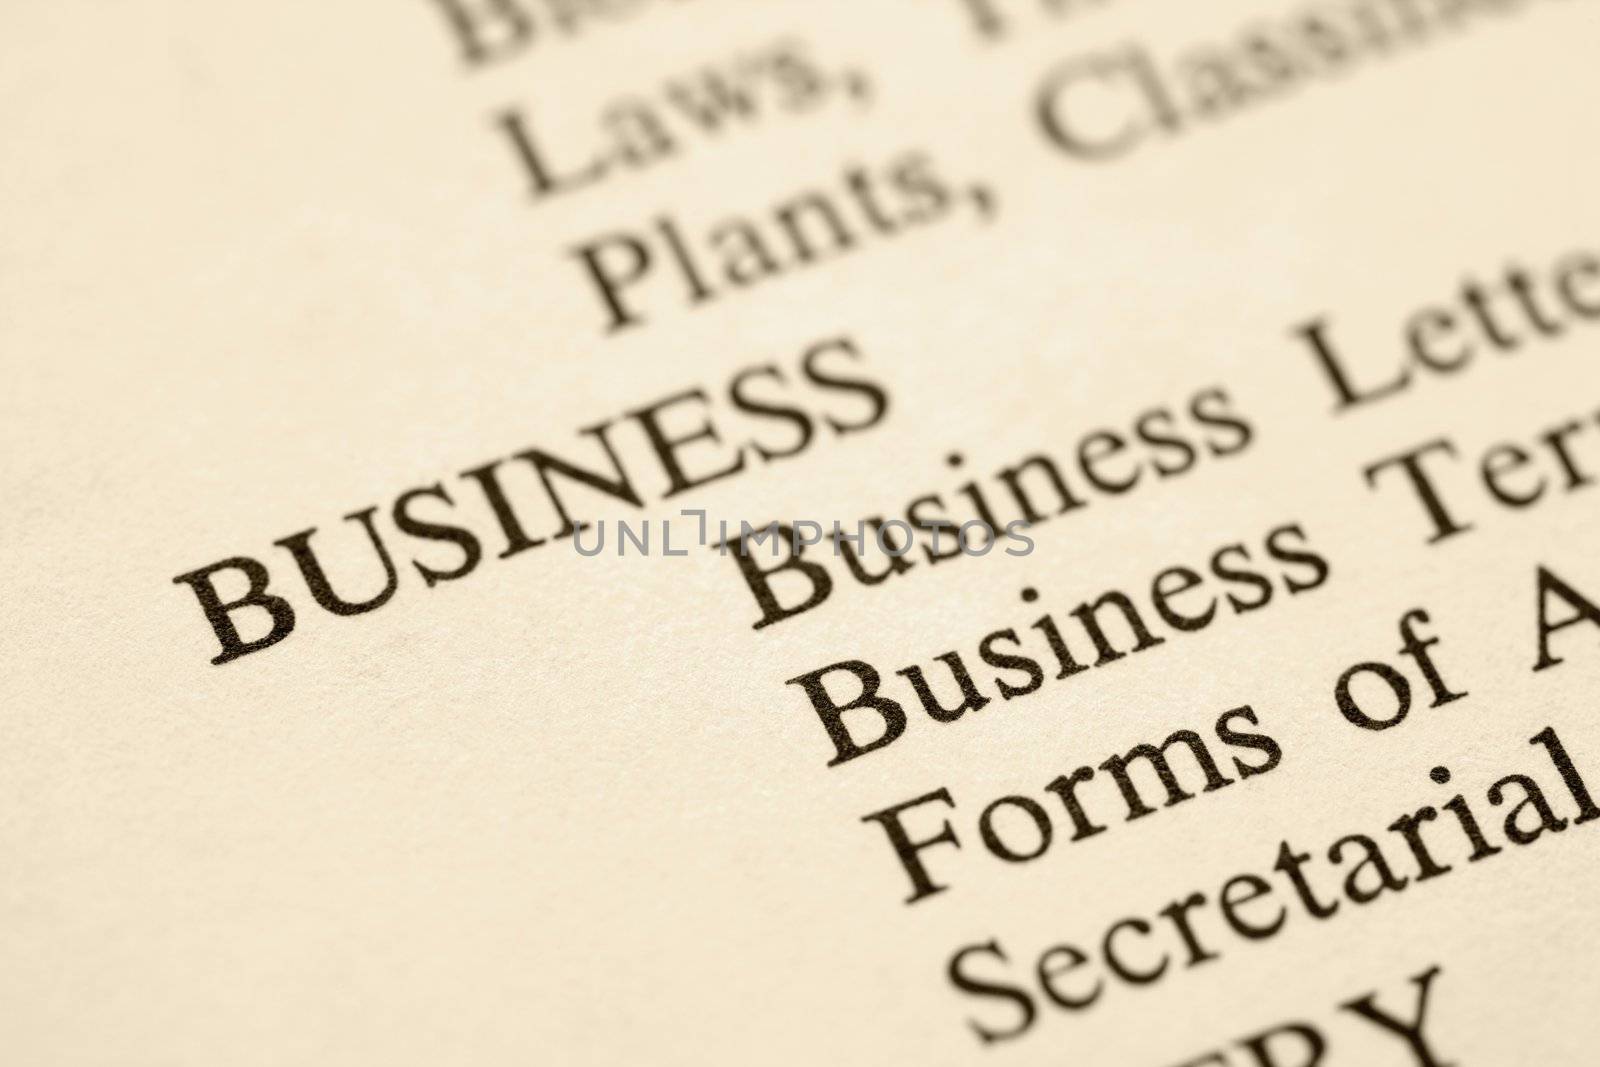 Page with the word business and categories of business forms.